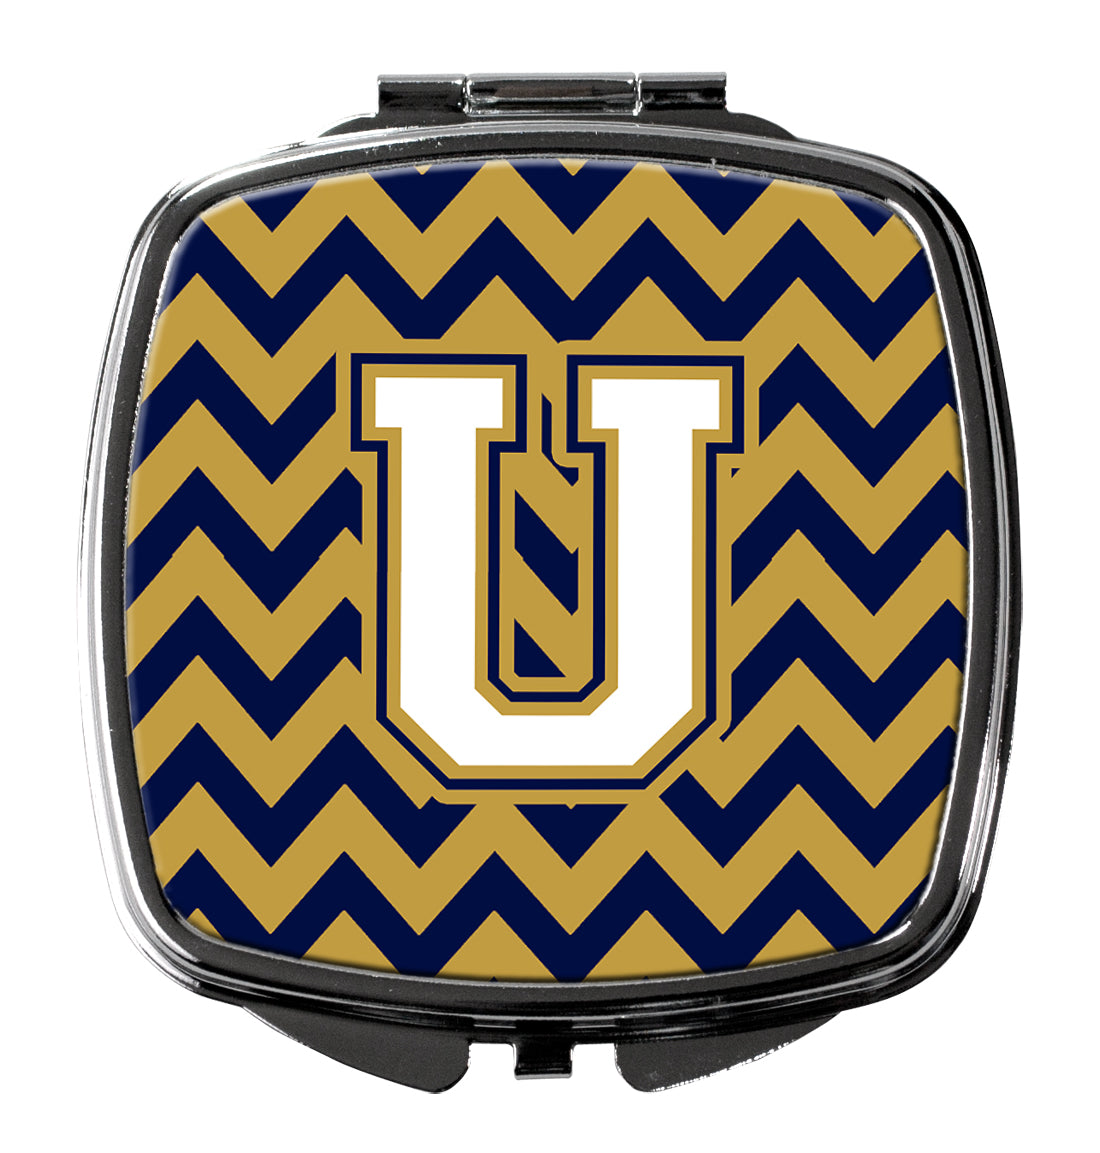 Letter U Chevron Navy Blue and Gold Compact Mirror CJ1057-USCM  the-store.com.